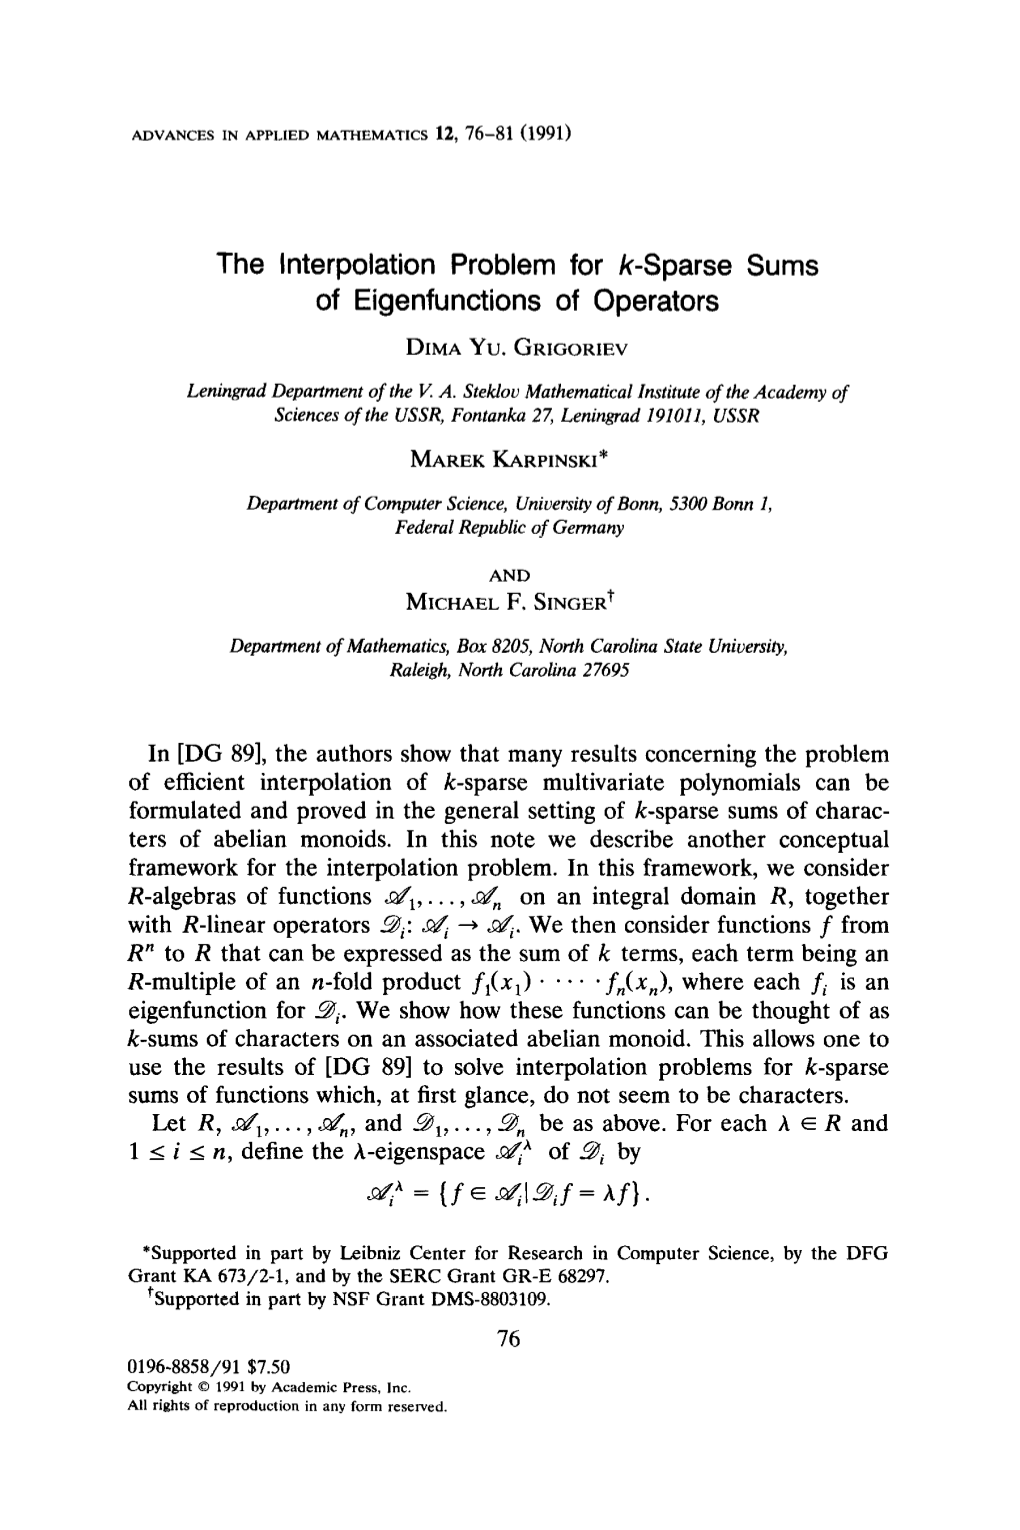 The Interpolation Problem for K-Sparse Sums of Eigenfunctions of Operators